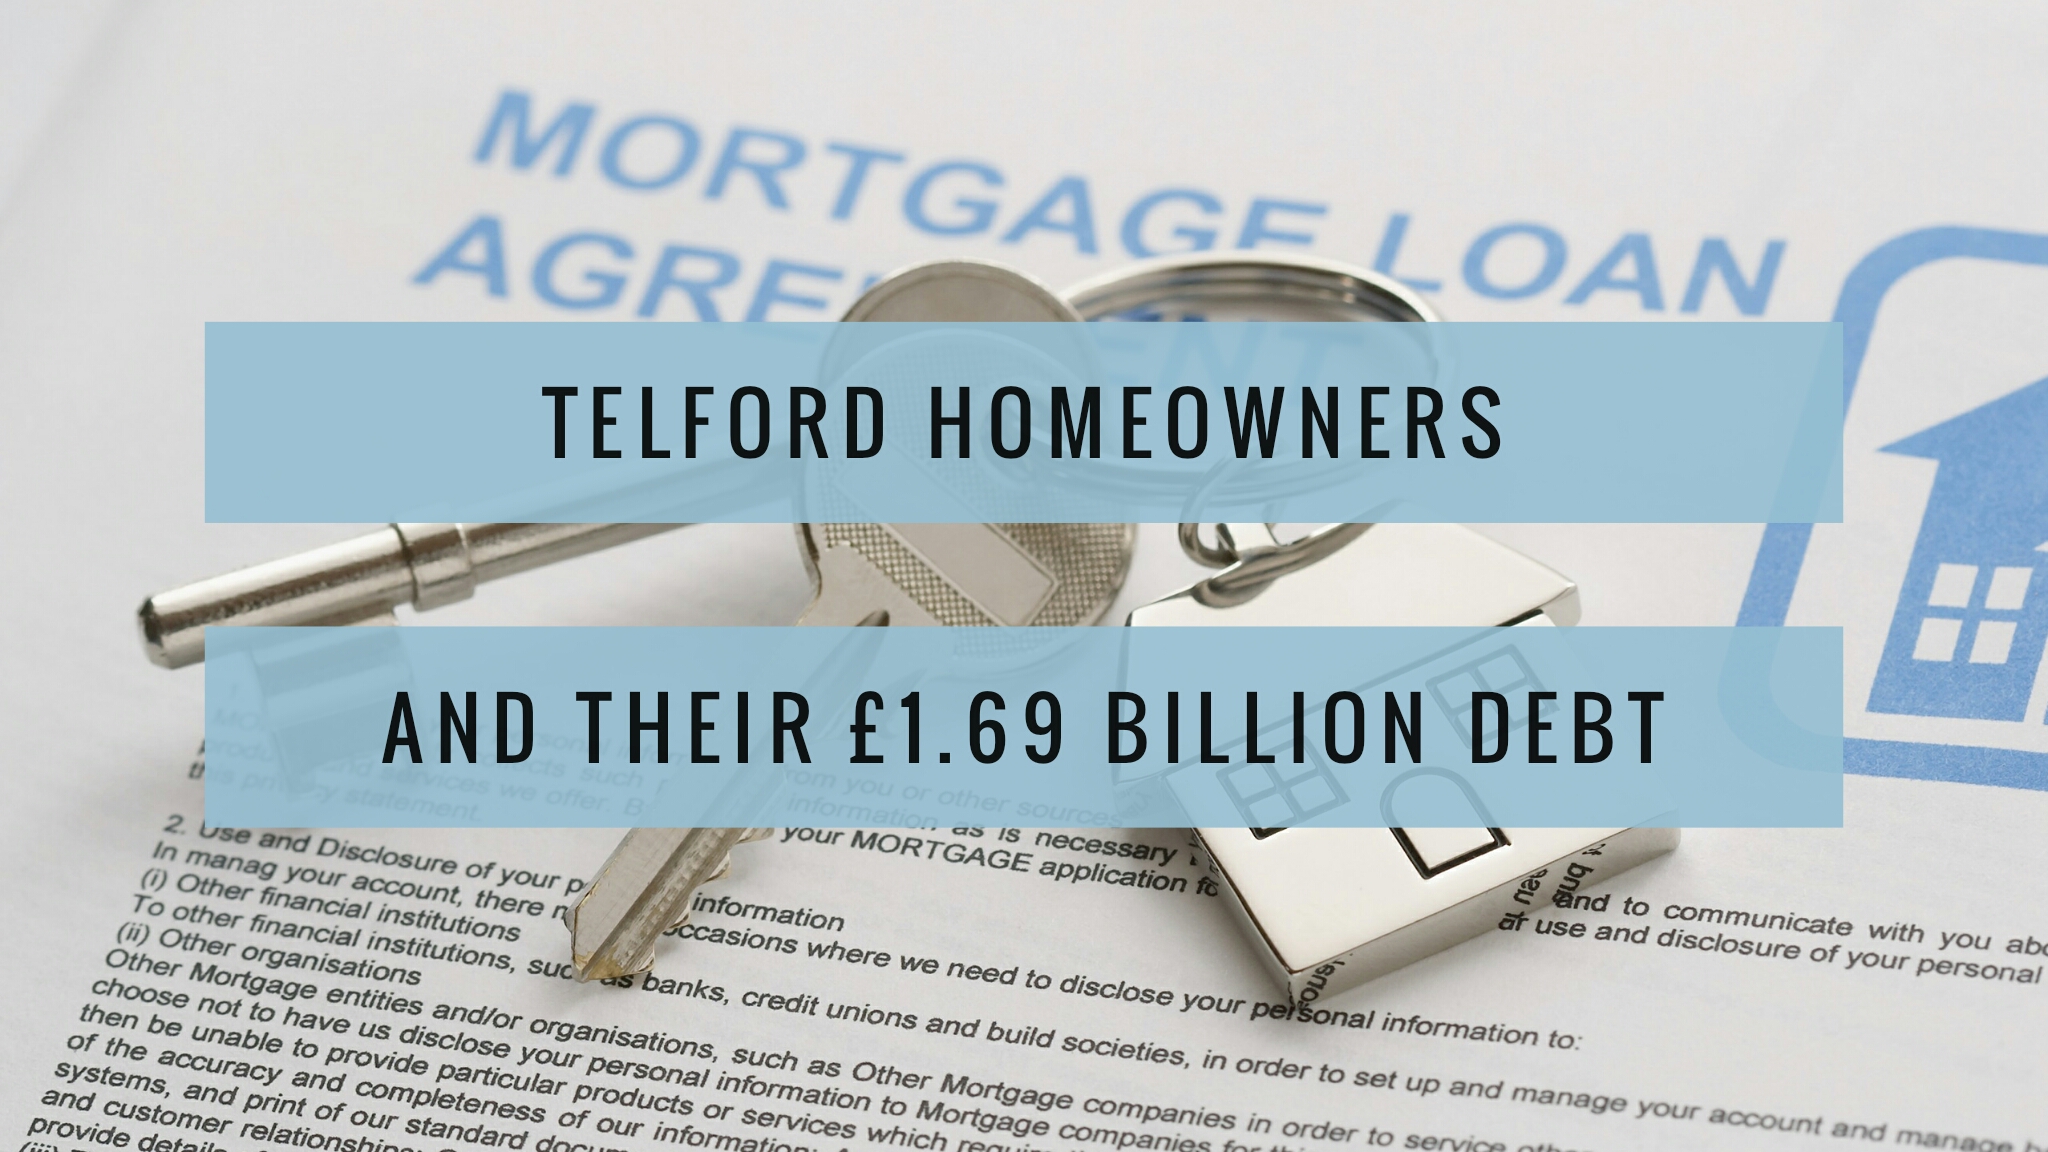 Telford Homeowners and their £1.69 billion Debt